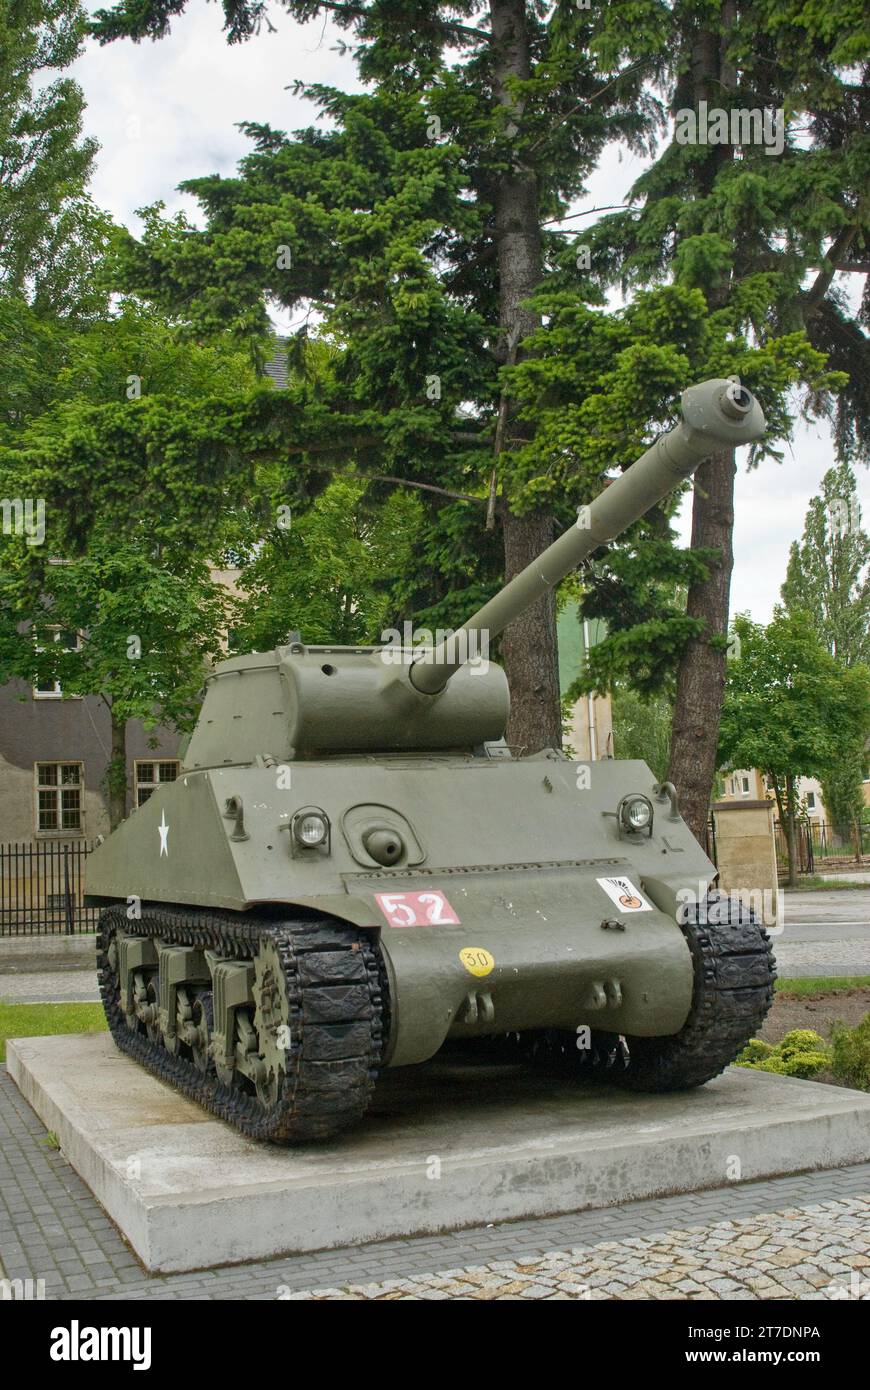 American M-36 Sherman tank from WWII displayed at headquarters of II Lubuska Armored Cavalry Division near Żagań, Lubusz Voivodeship, Poland Stock Photo